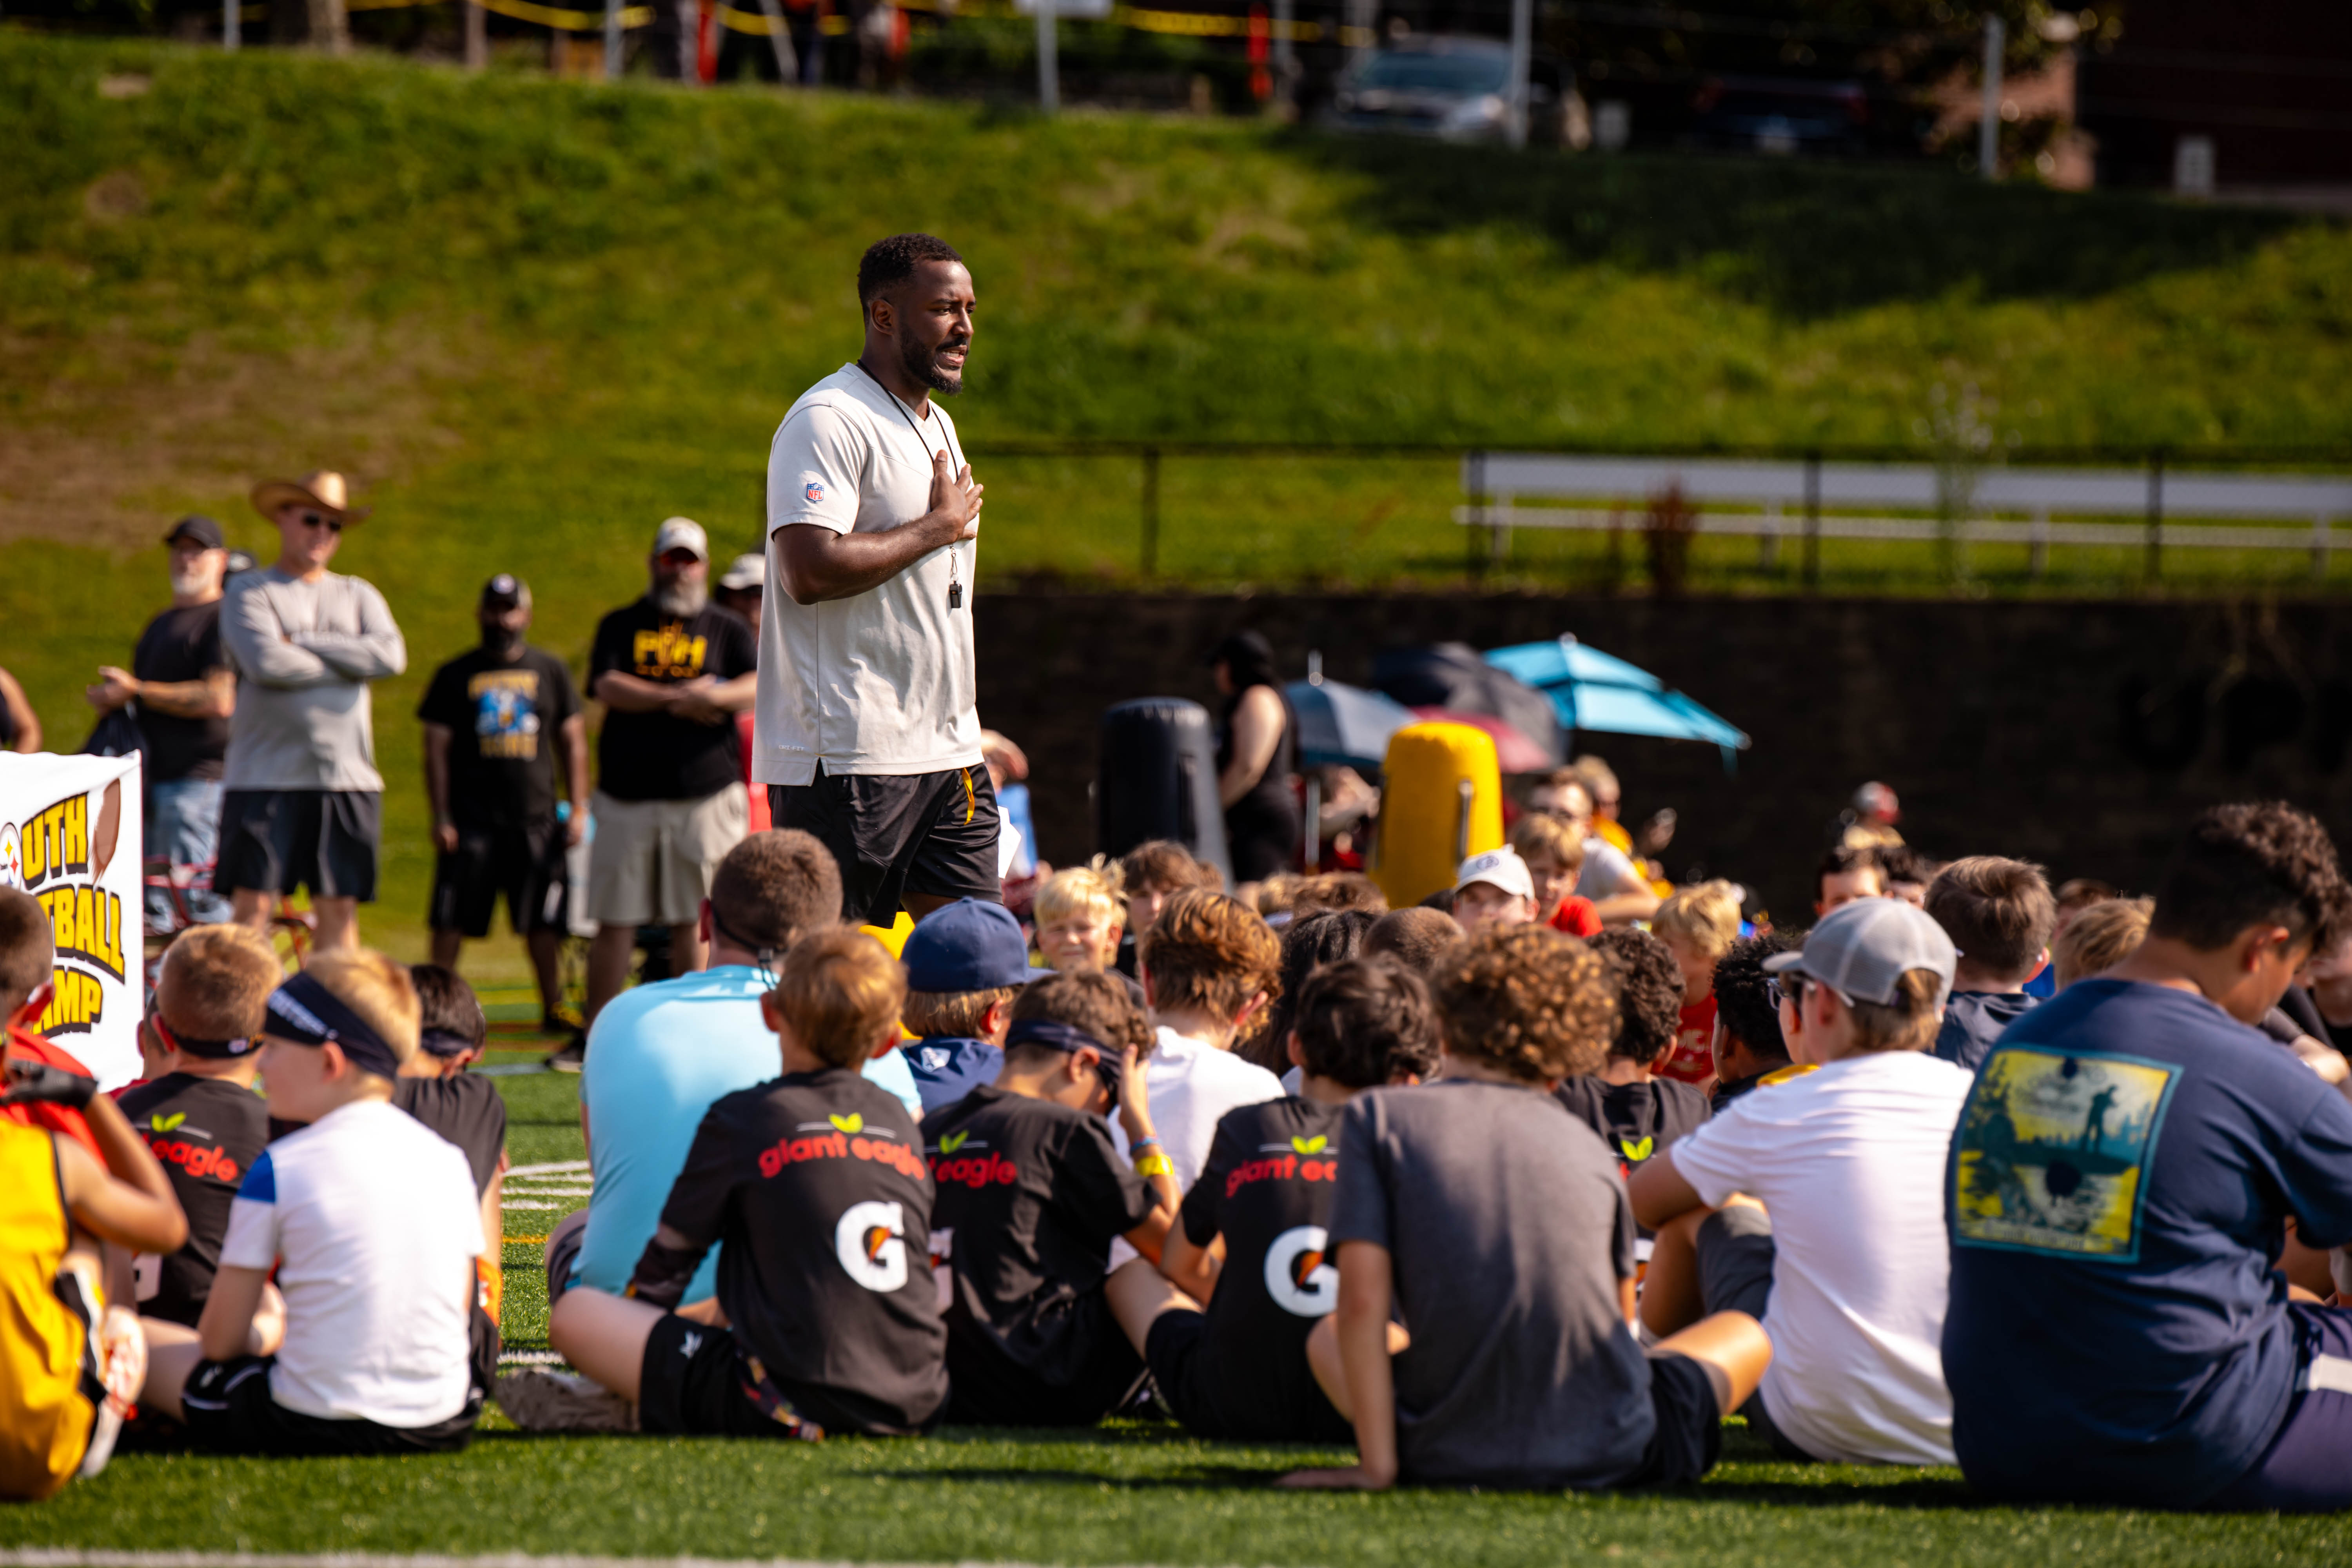 Camp director Joe Lofton (standing) talks to the campers during a break from drills